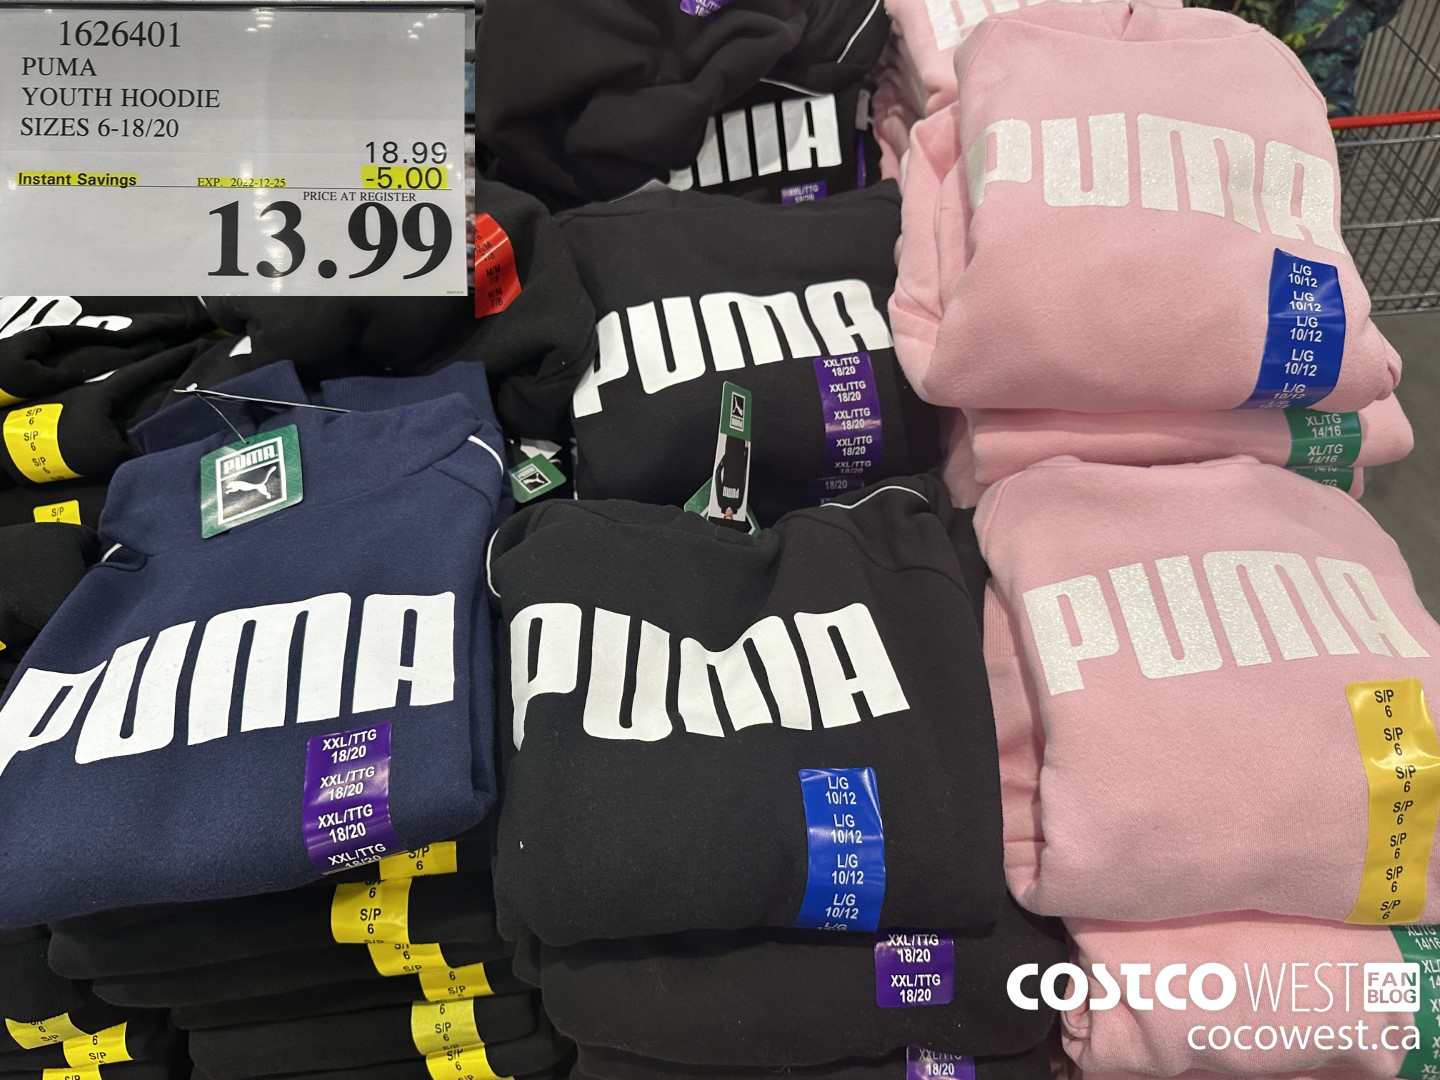 Costco Fall 2022 Superpost – The Entire Clothing Section - Sweaters,  Jackets and Boots! - Costco West Fan Blog